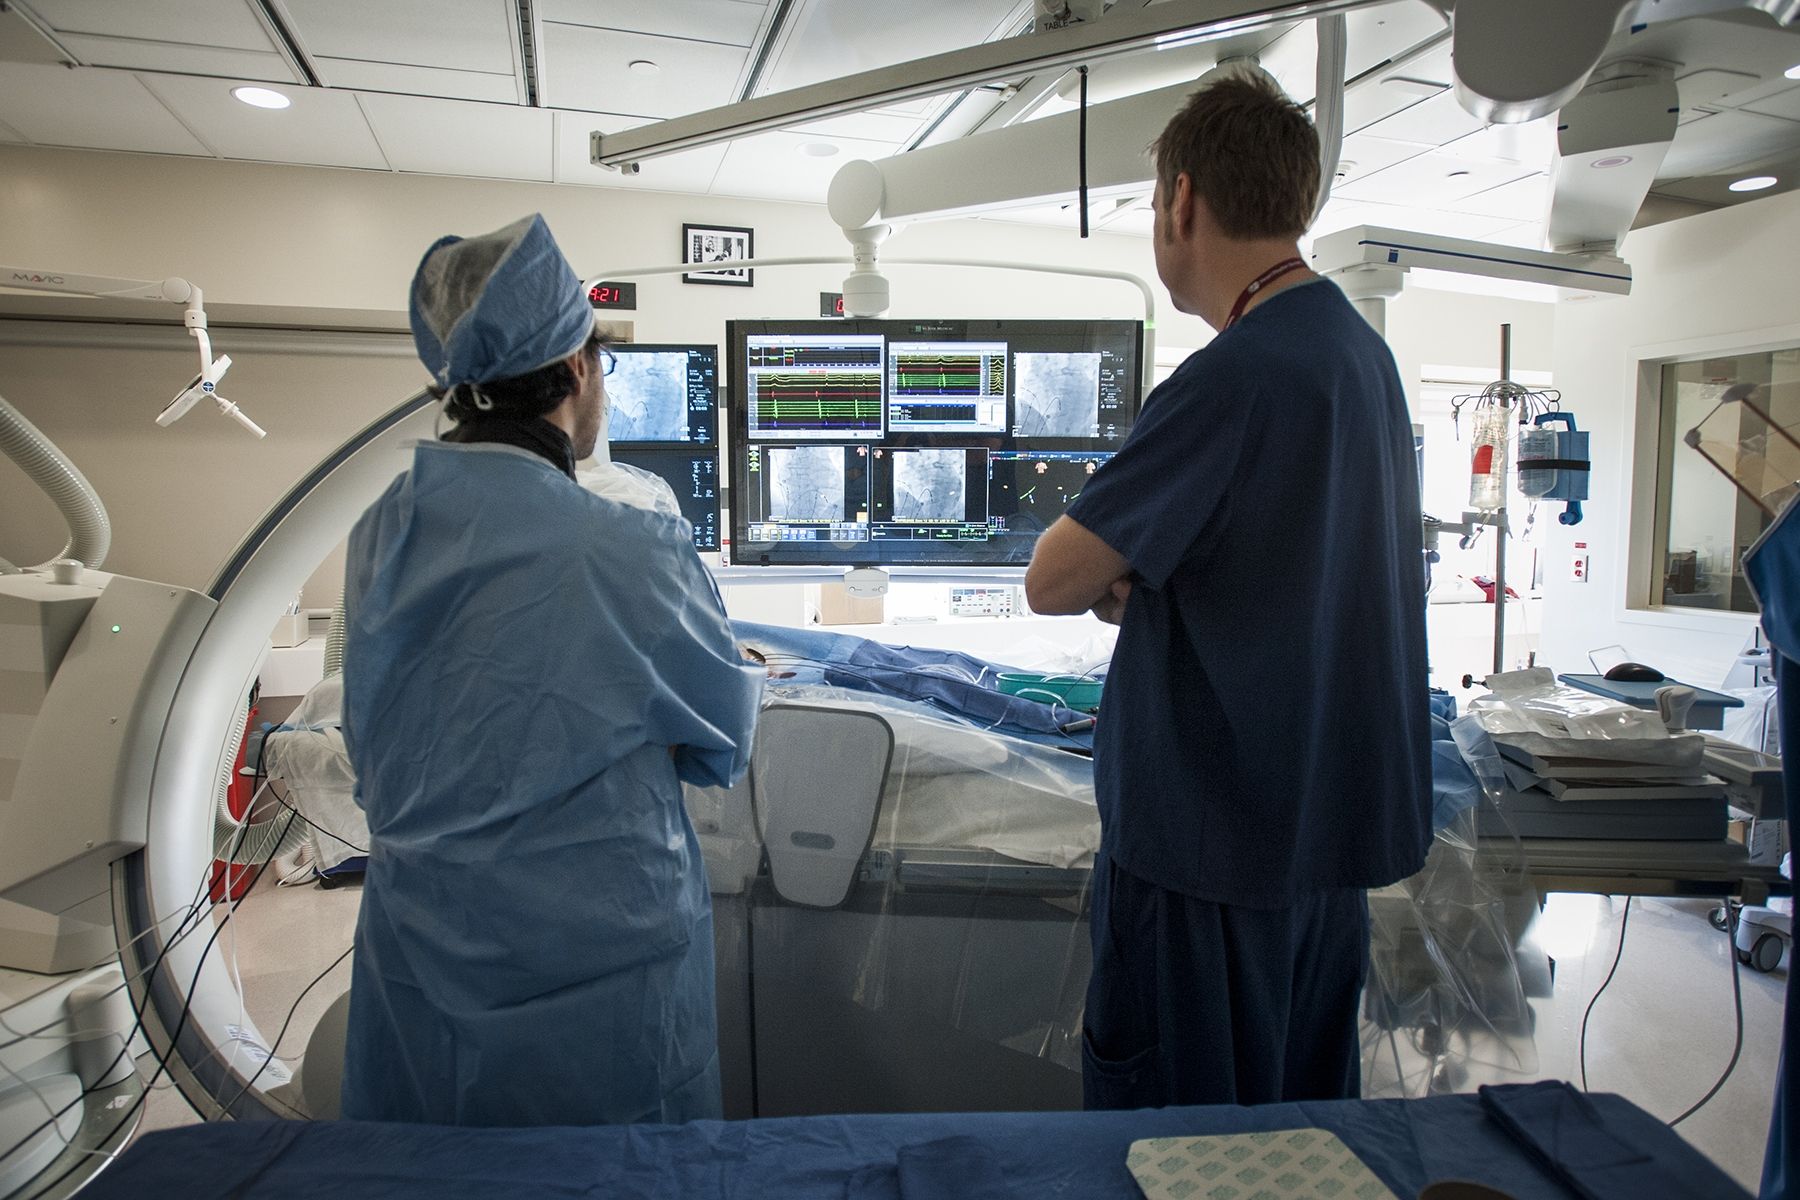 Patient-oriented research takes place all over KGH, including in our recently opened state-of-the-art electrophysiology lab for cardiac patients.